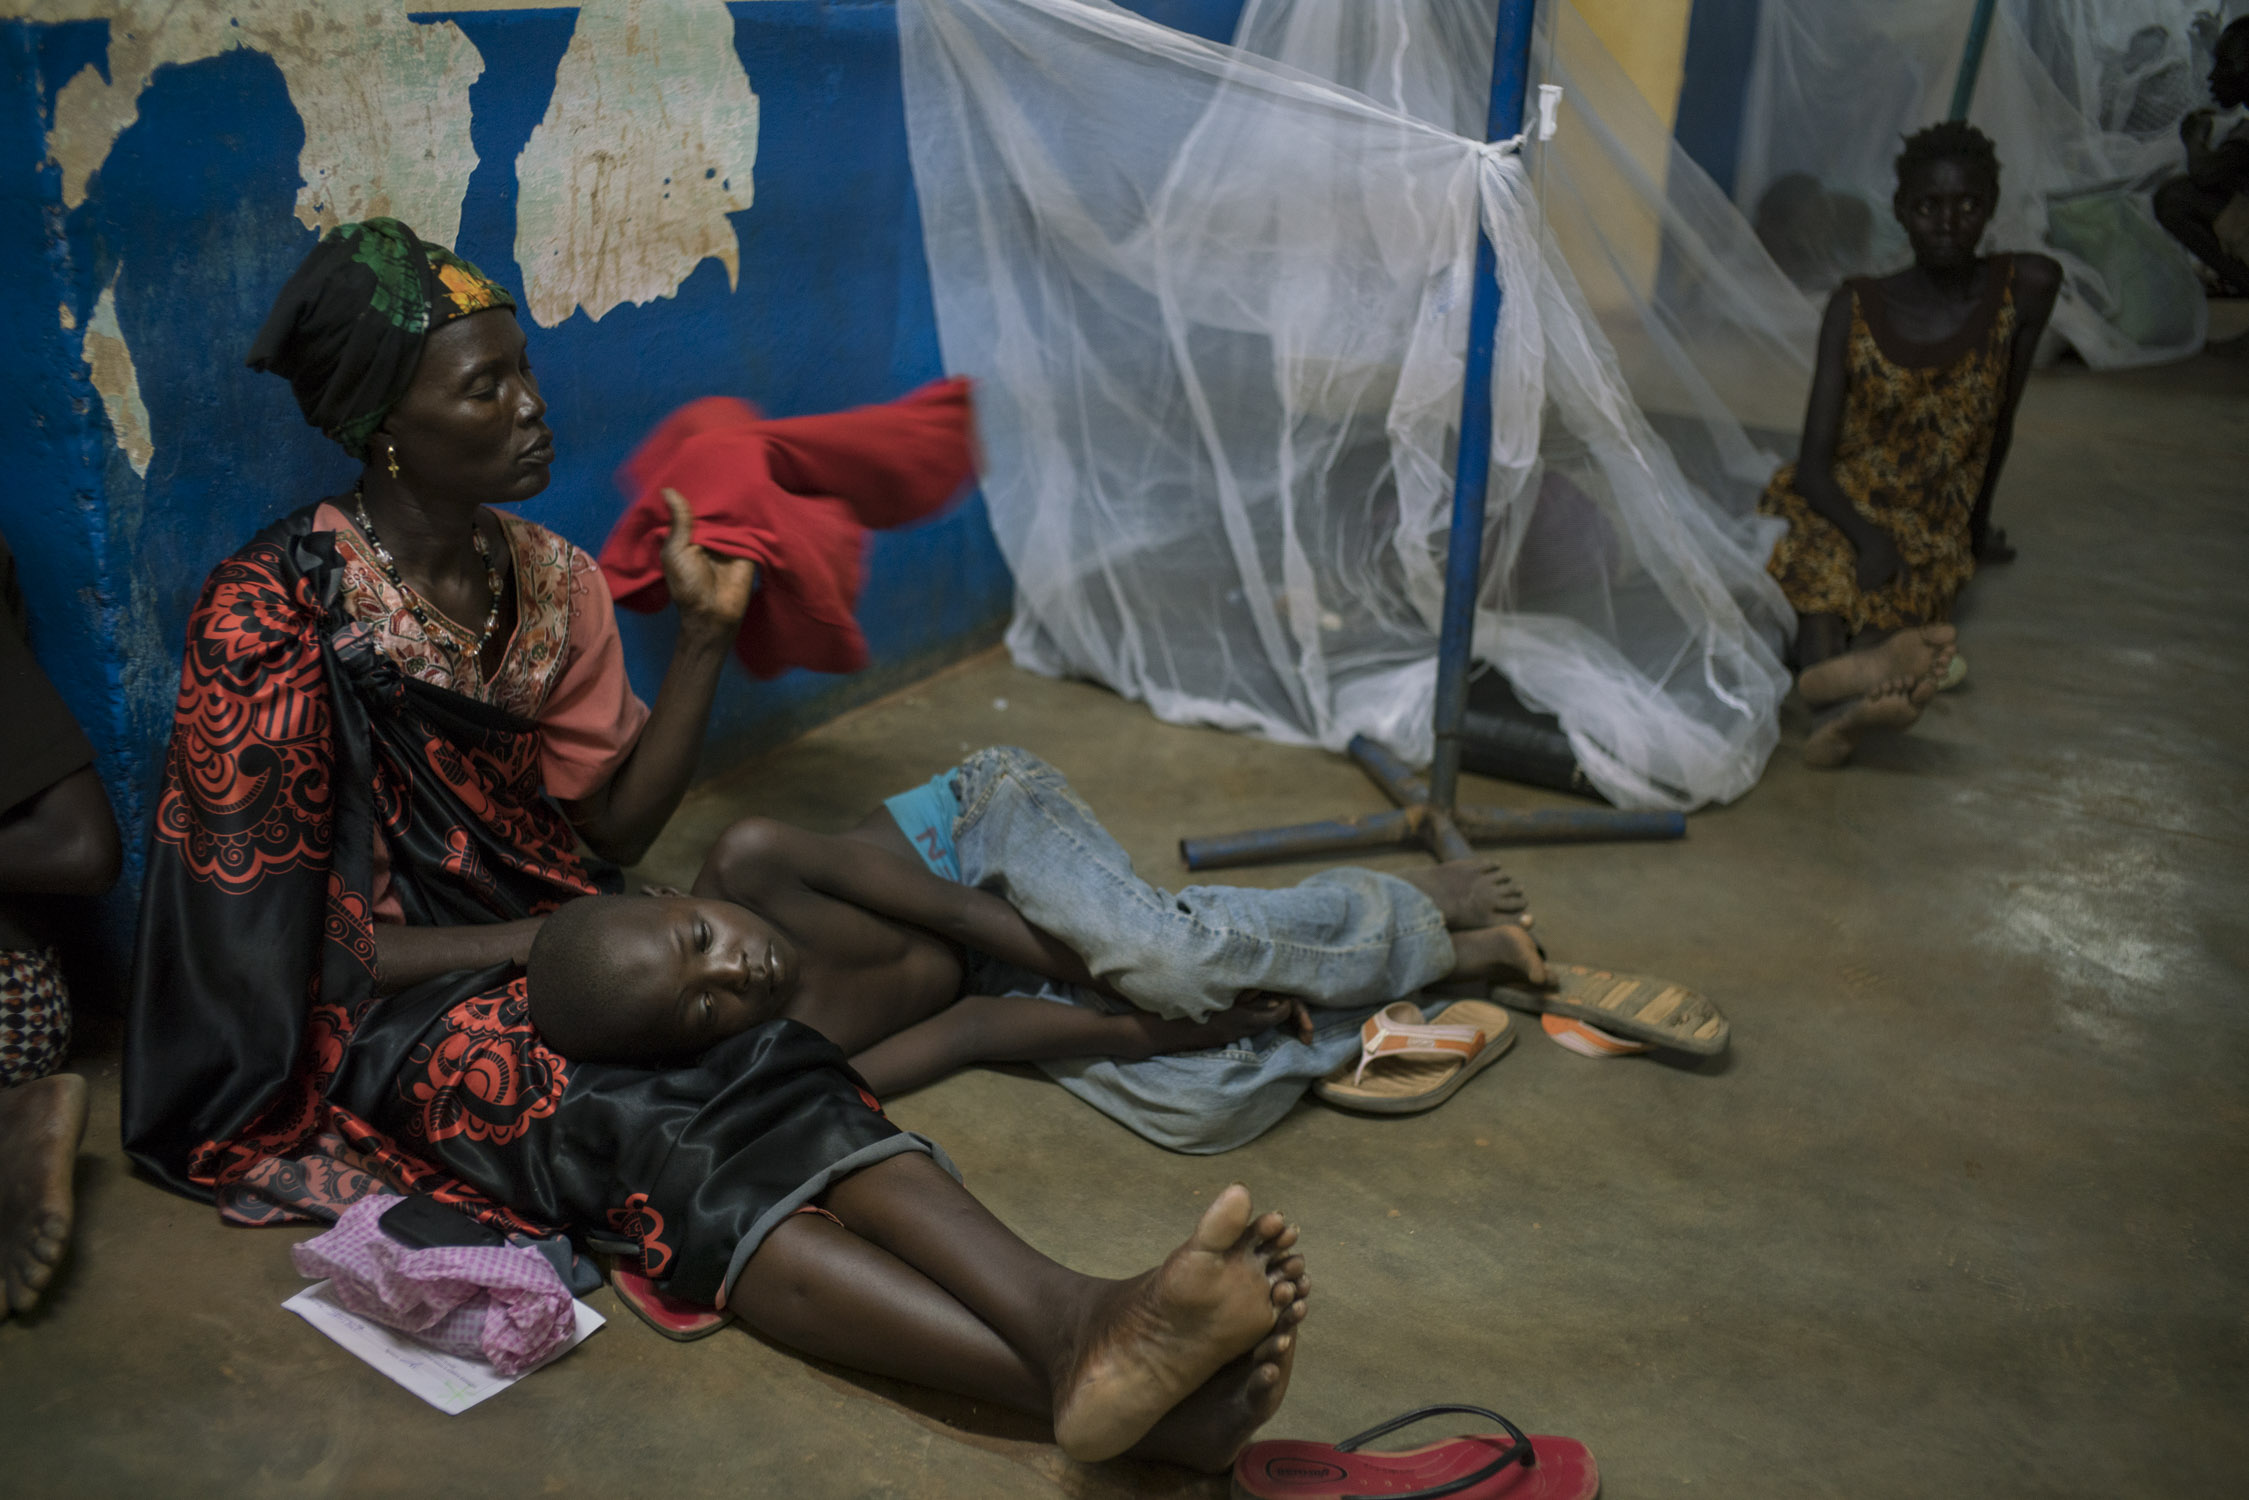  A woman fans her feverish son, and waits for him to be admitted into the MSF-run portion of the hospital in Aweil, the only hospital serving the 1.2 million living in Northern Bahr el Ghazal, South Sudan's poorest state. An overflow of malaria patie